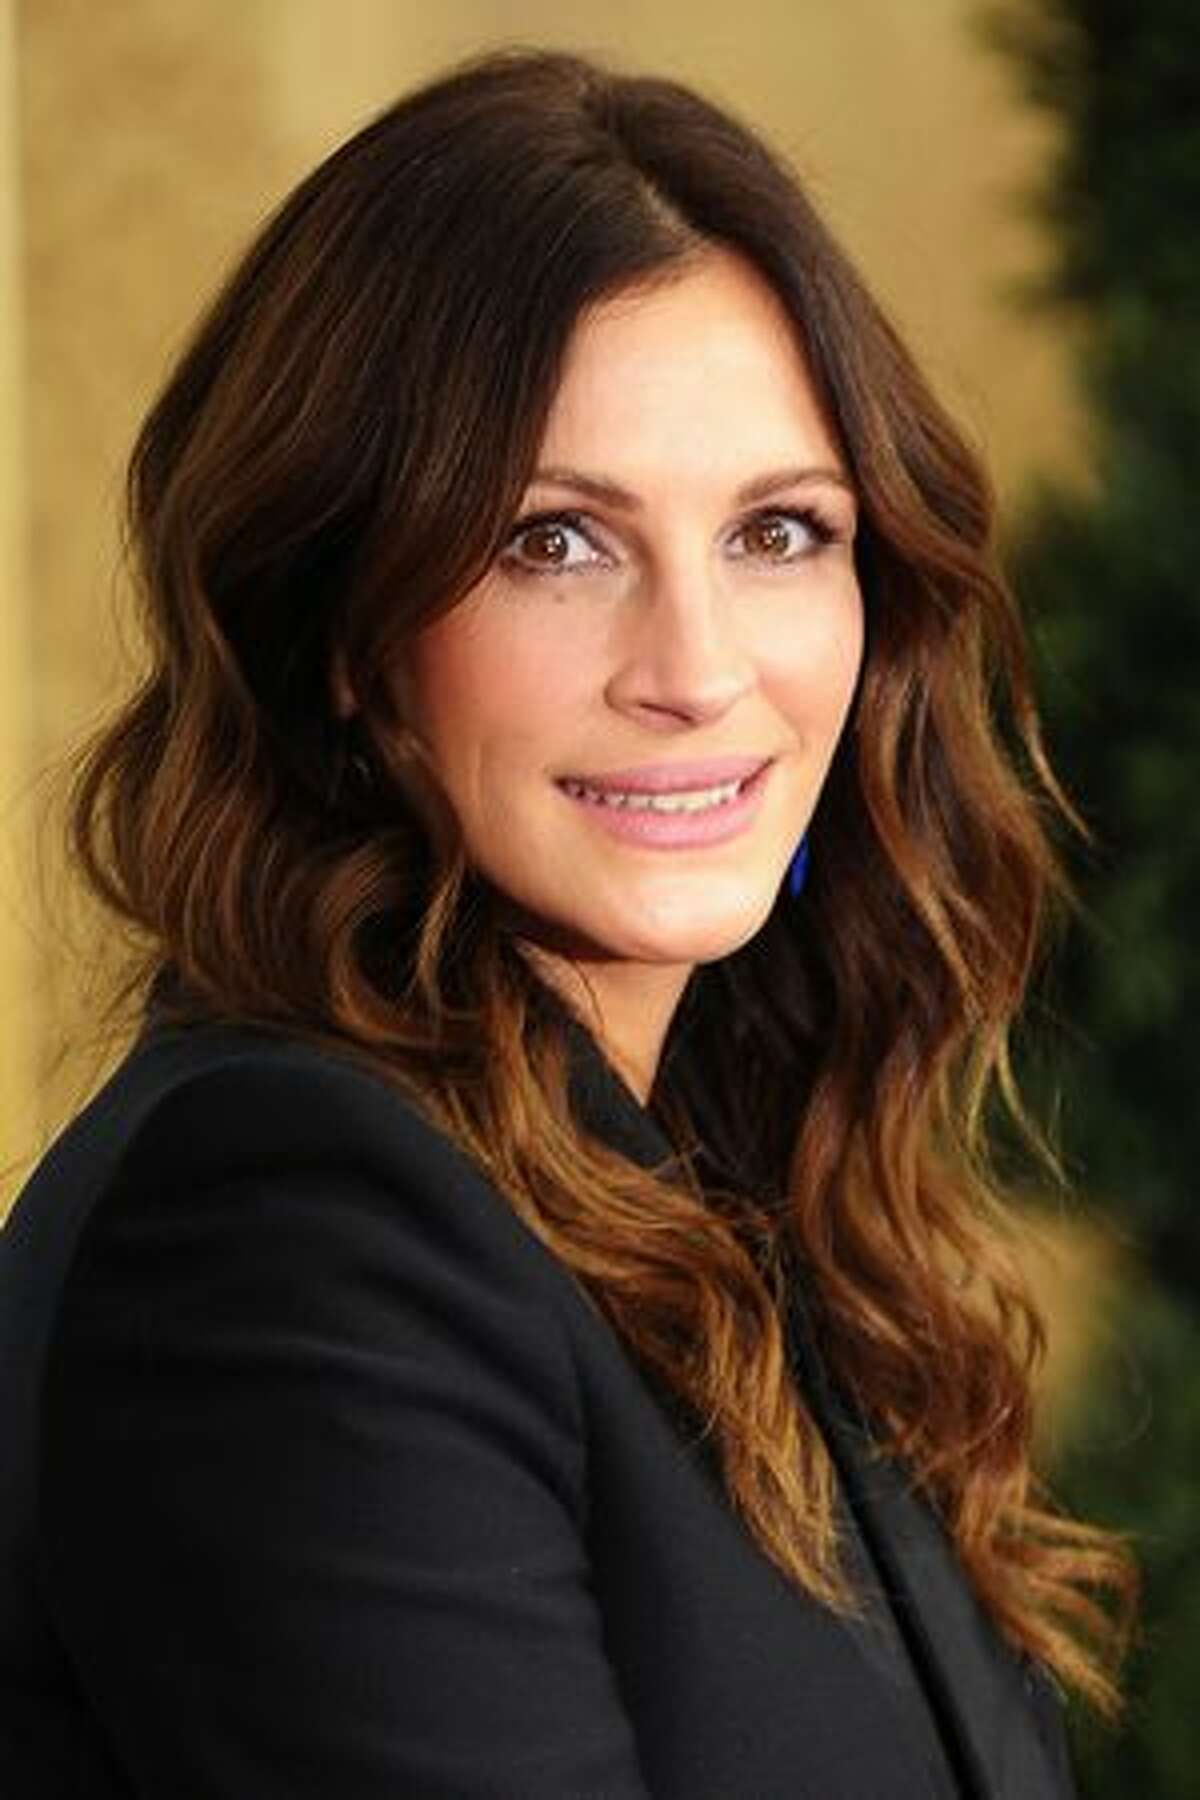 Actress Julia Roberts attends the premiere of "Eat Pray Love" at the Ziegfeld Theatre in New York City.